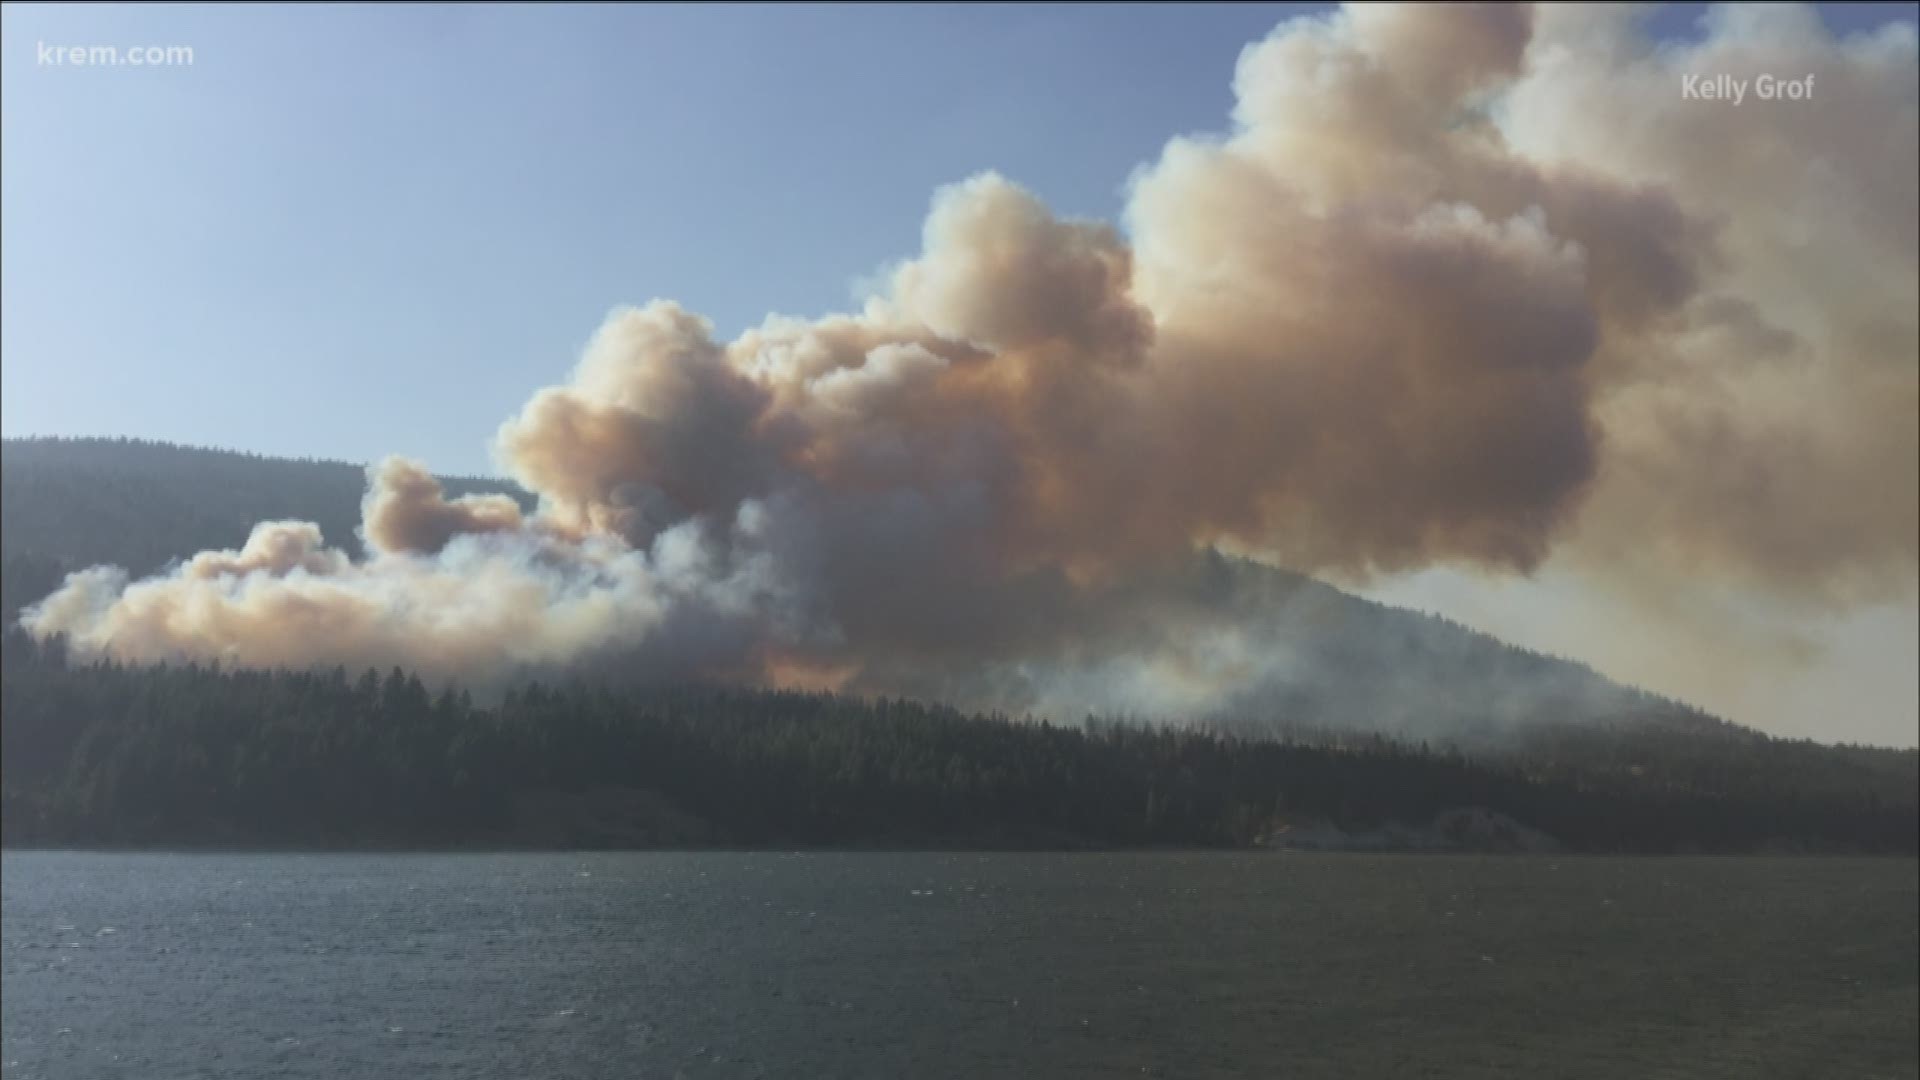 Boyds Fire burning near Kettle Falls still not contained (8-15-18)